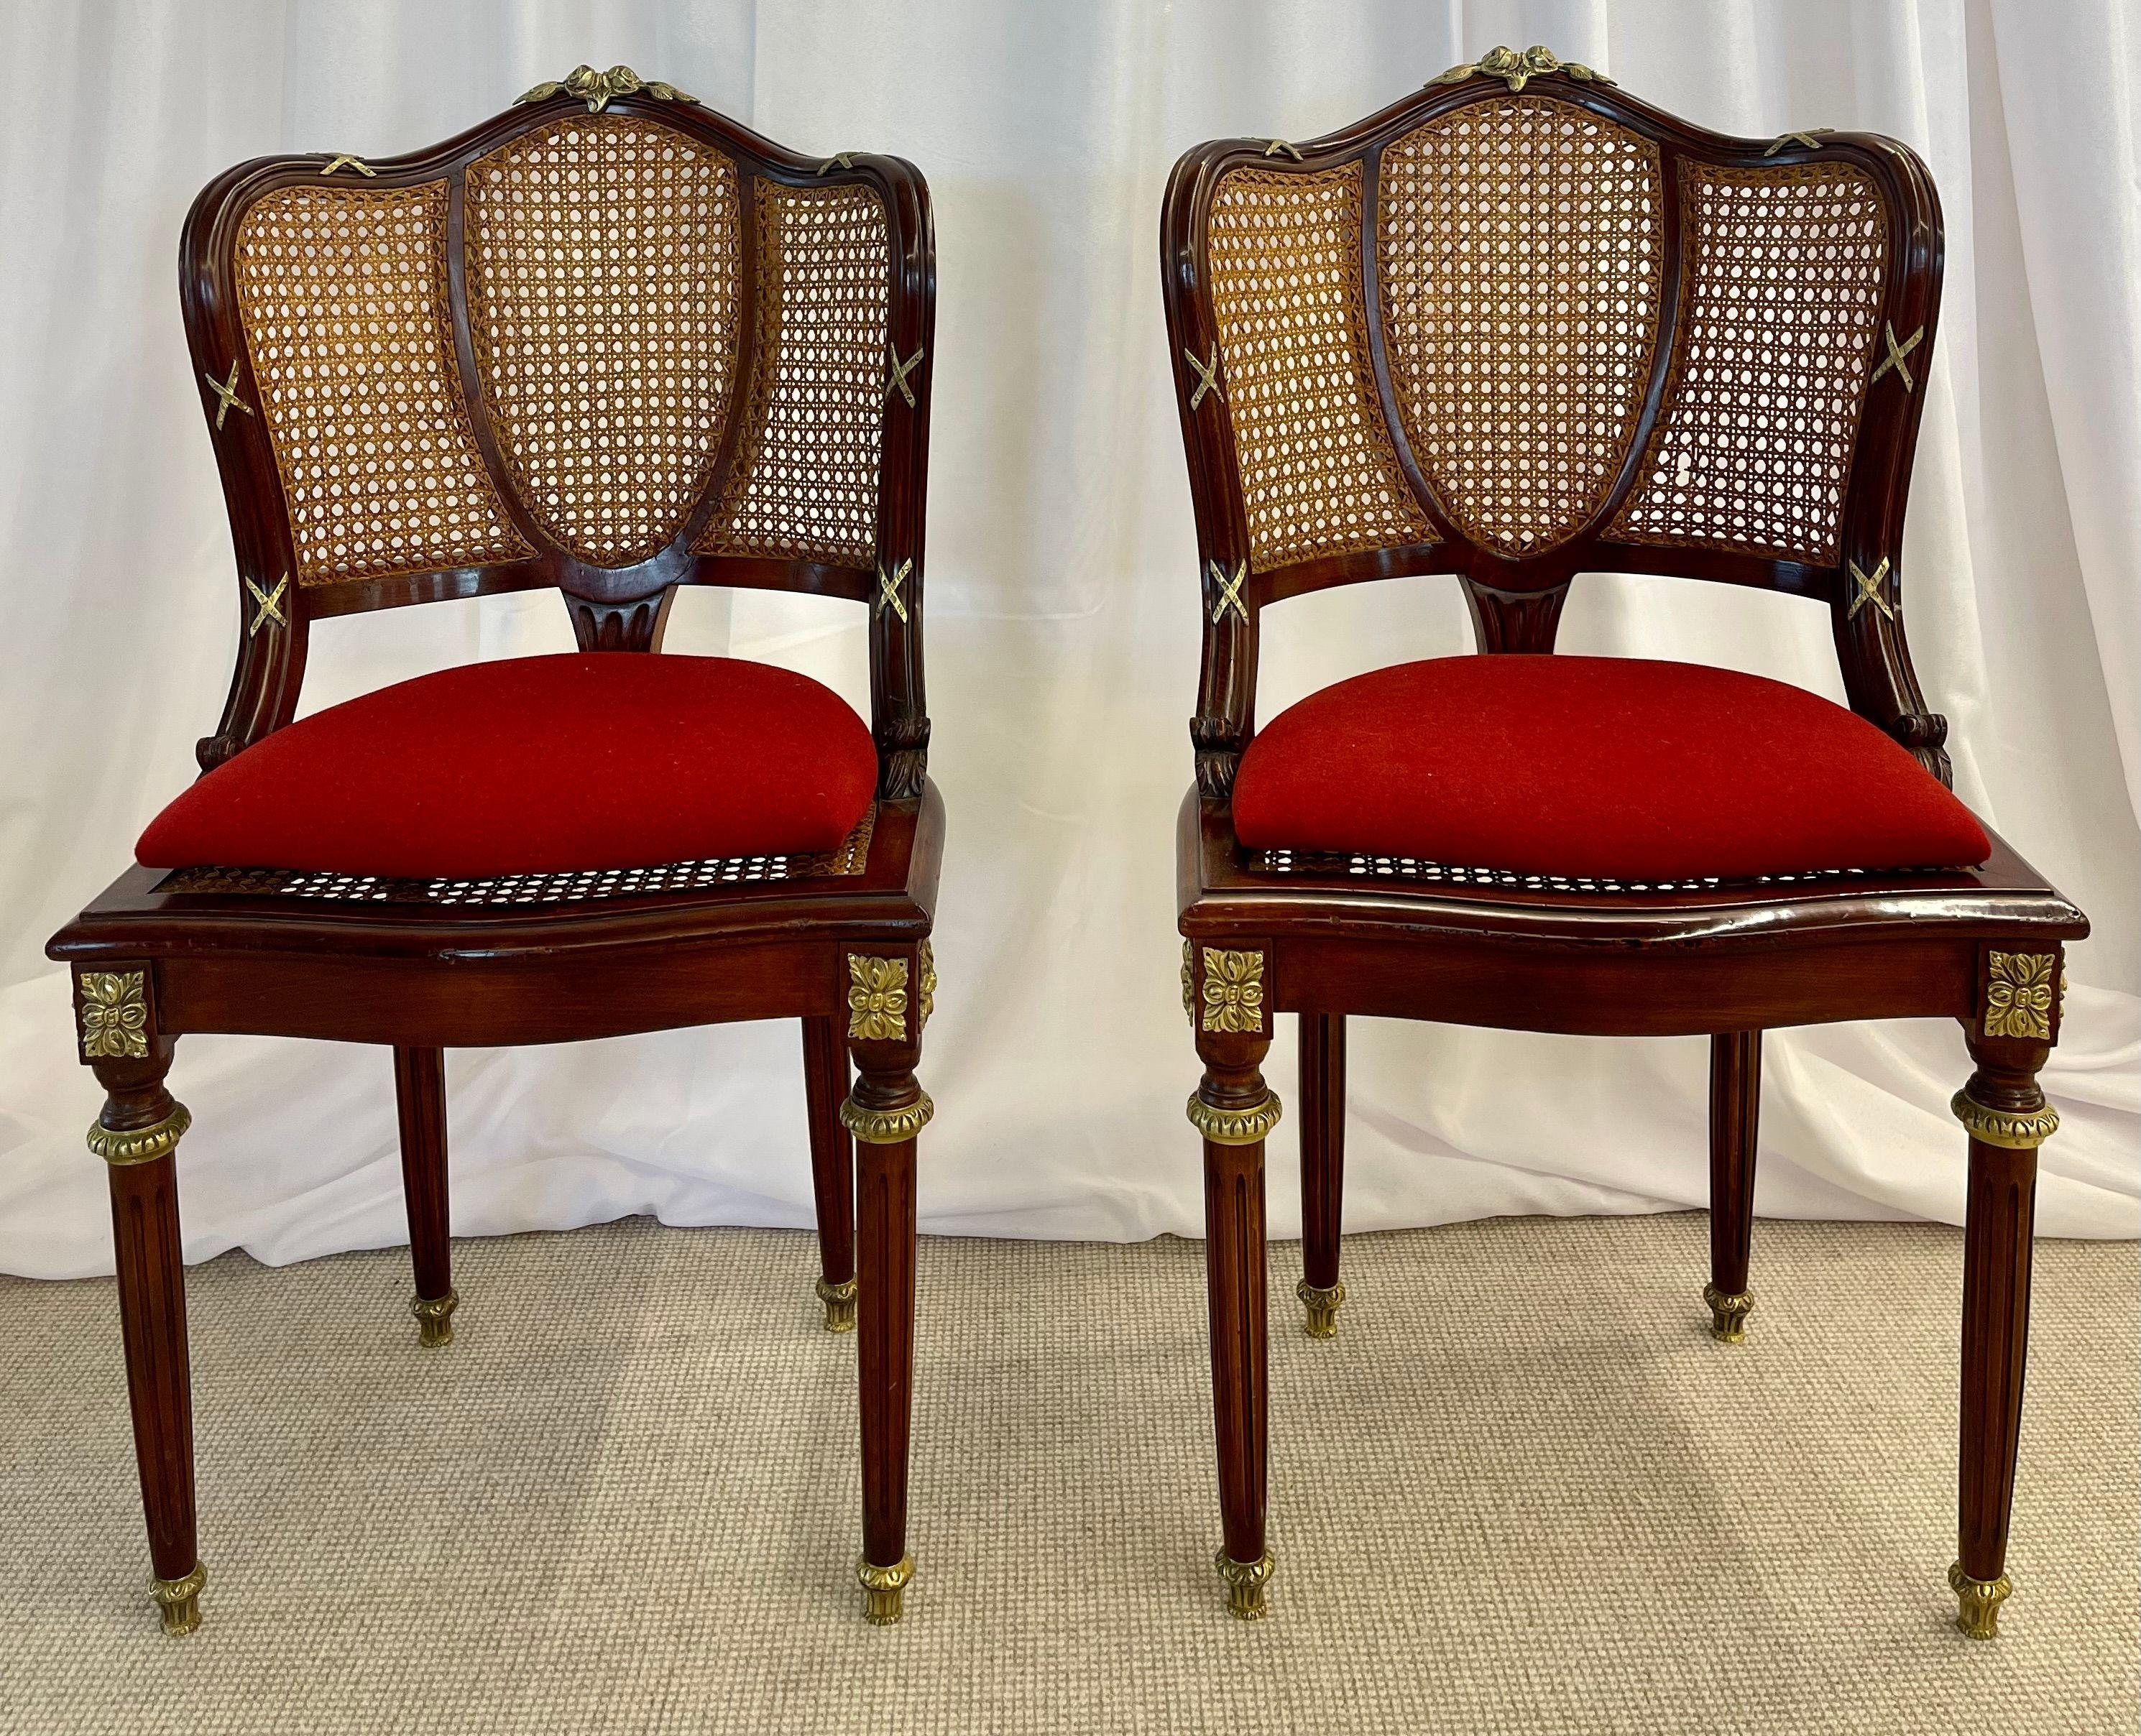 Pair of Fine Bronze-Mounted Louis XVI Style Dining Chairs Manner of Jansen 1